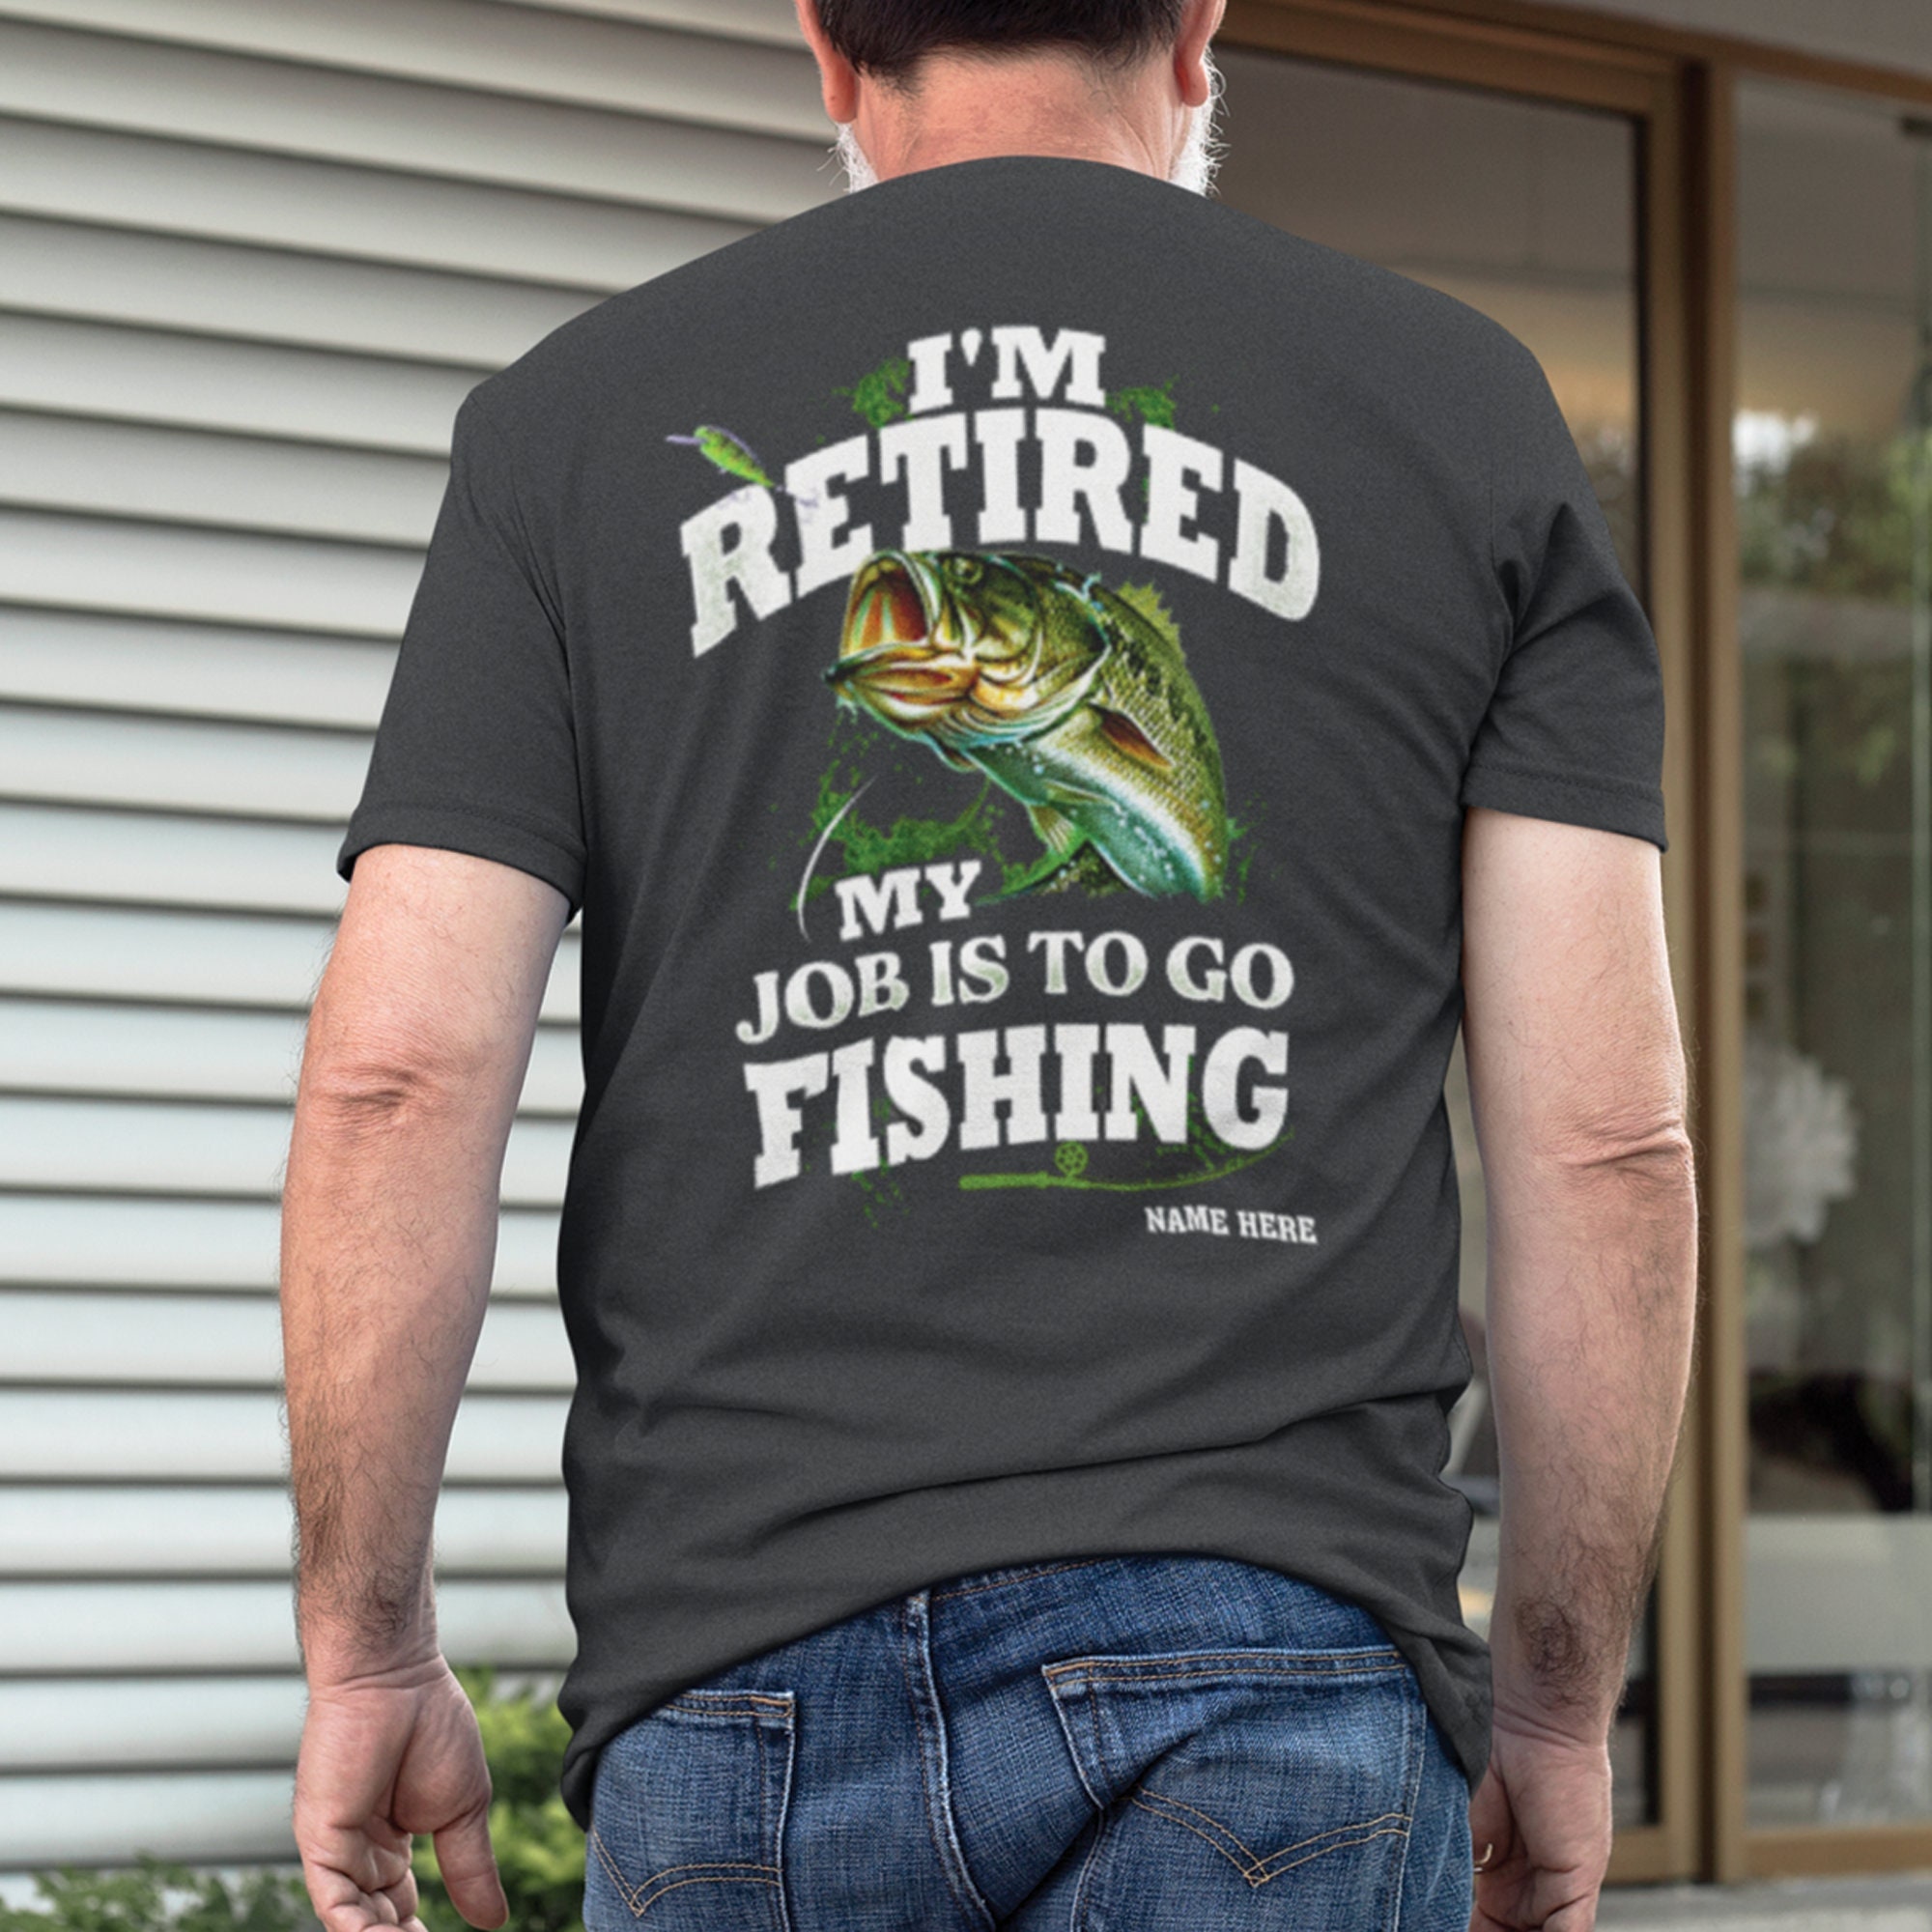 I'm Retired My Job is Go to Fishing, Funny Fishing Shirt, Fishing Lover  Gift, Father's Day Gift, Shirt for Fisher -  Canada